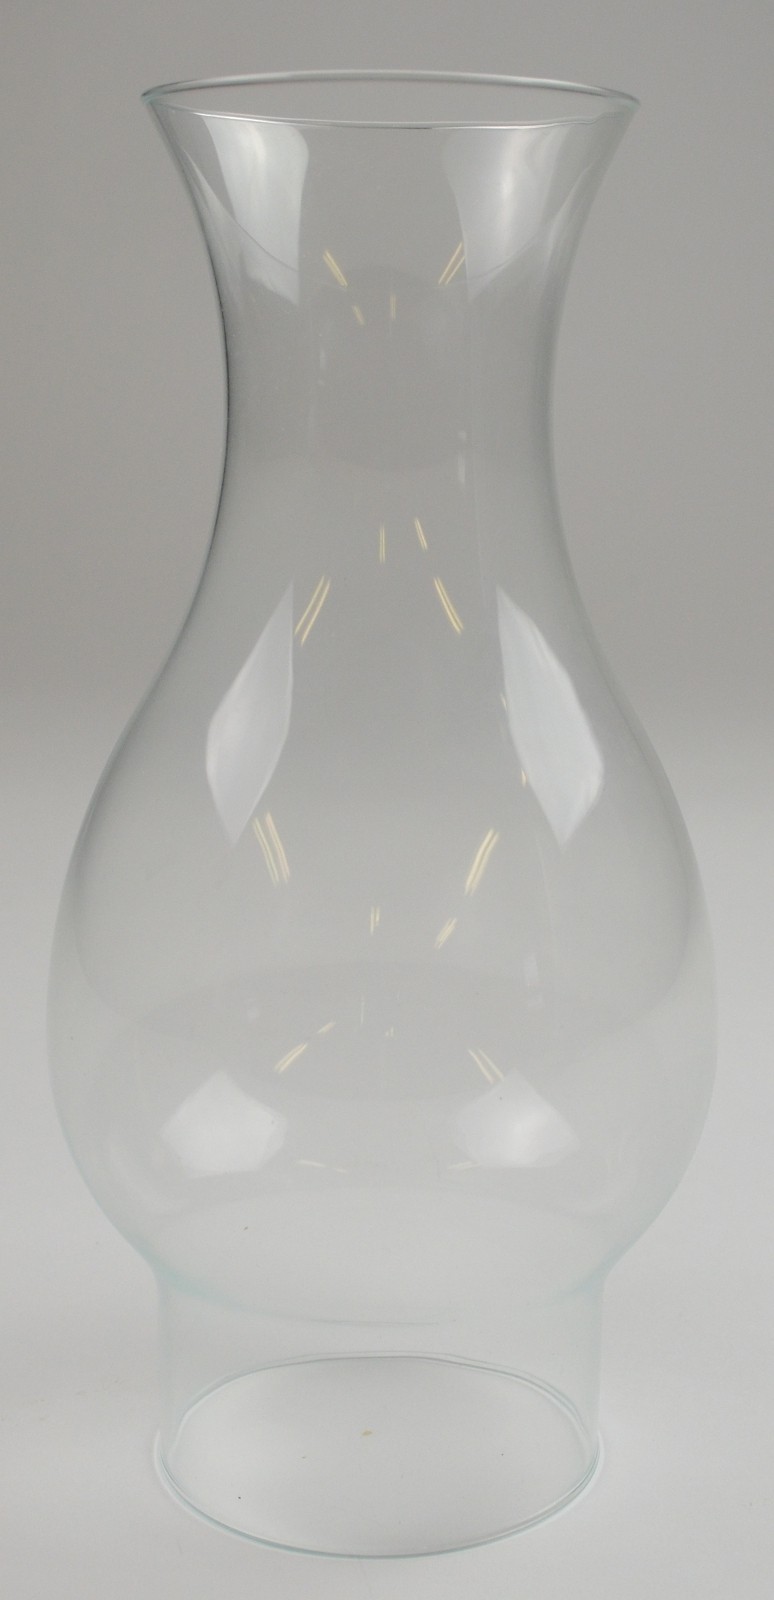 Details about vintage clear glass smooth top hurricane lamp chimney